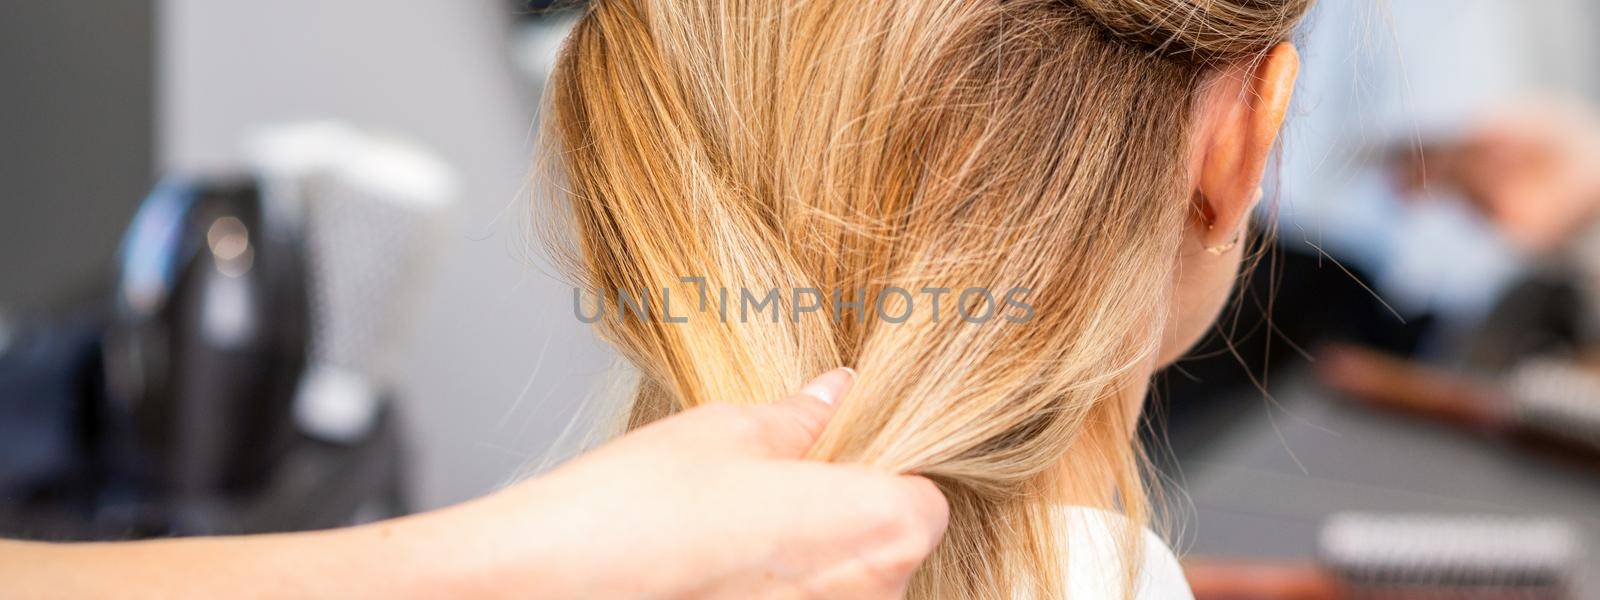 Close up of hands of female hairdresser styling hair of a blonde woman in a hair salon